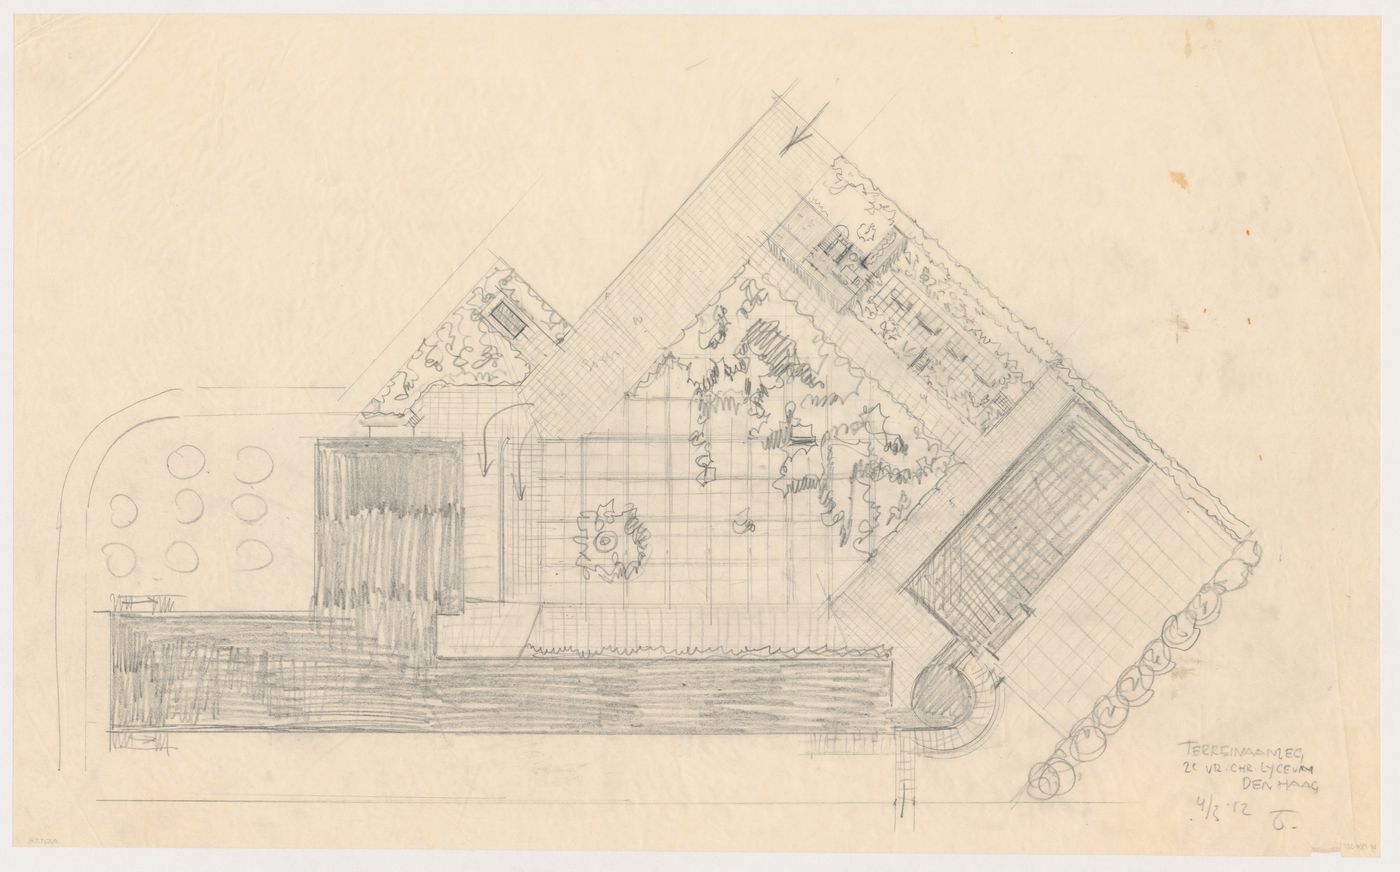 Site plan for the Second Liberal Christian Lyceum, including the school-porter's house, The Hague, Netherlands